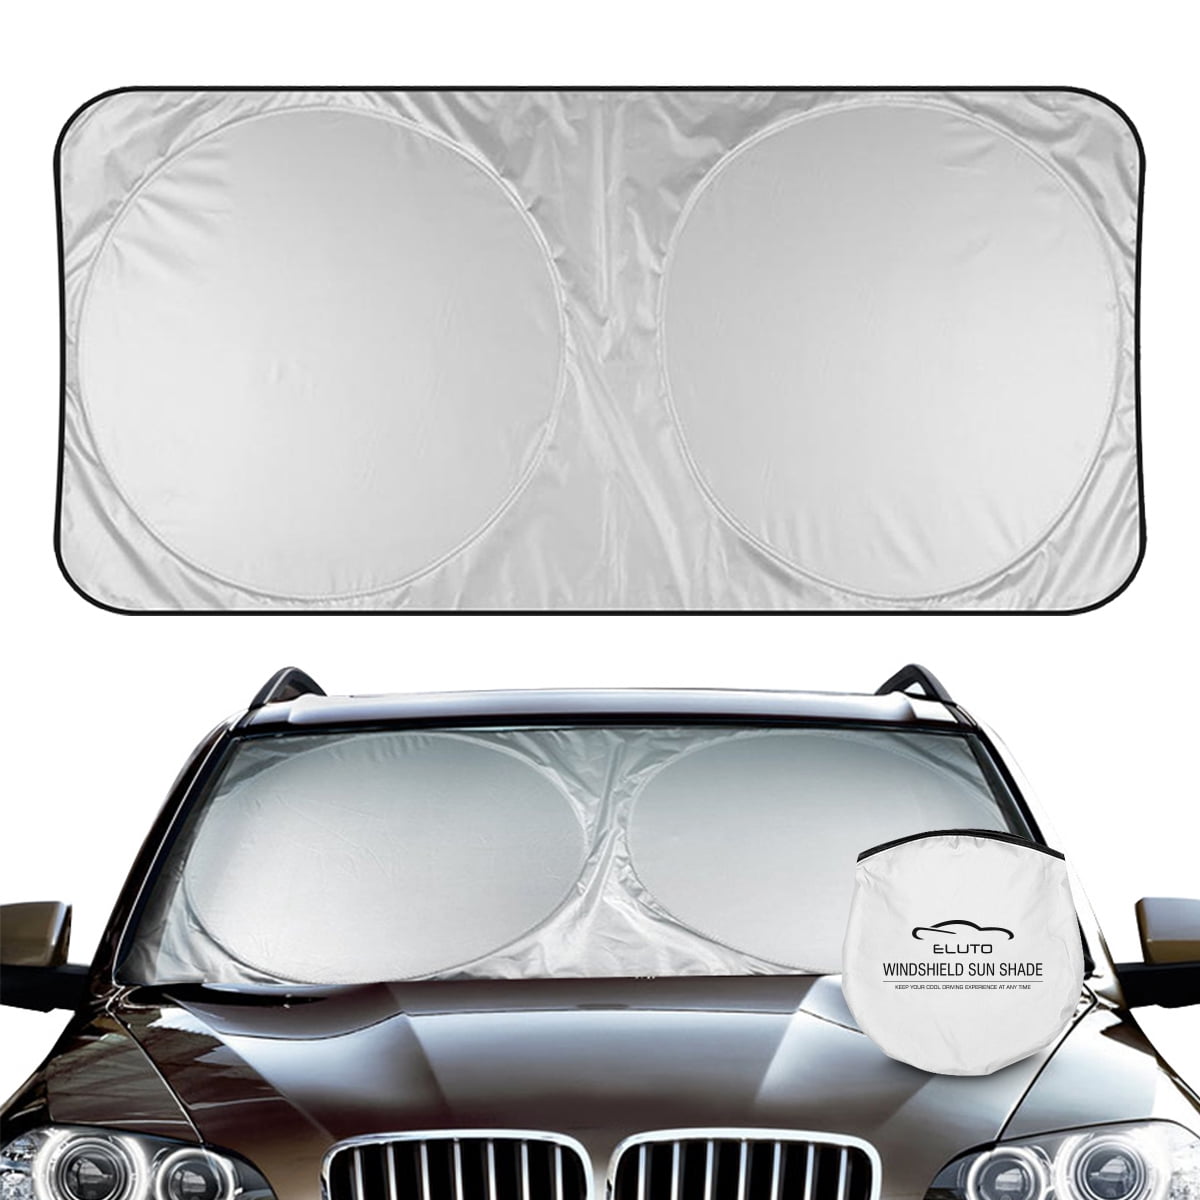 SUVs Car Accessories Vehicles Universal for Most Cars Black Car Windshield Sun Shade 27.5 x 55.1 Foldable Metallic Reflective Front Sunshade UV Rays Heat Privacy Protection for Men Women 